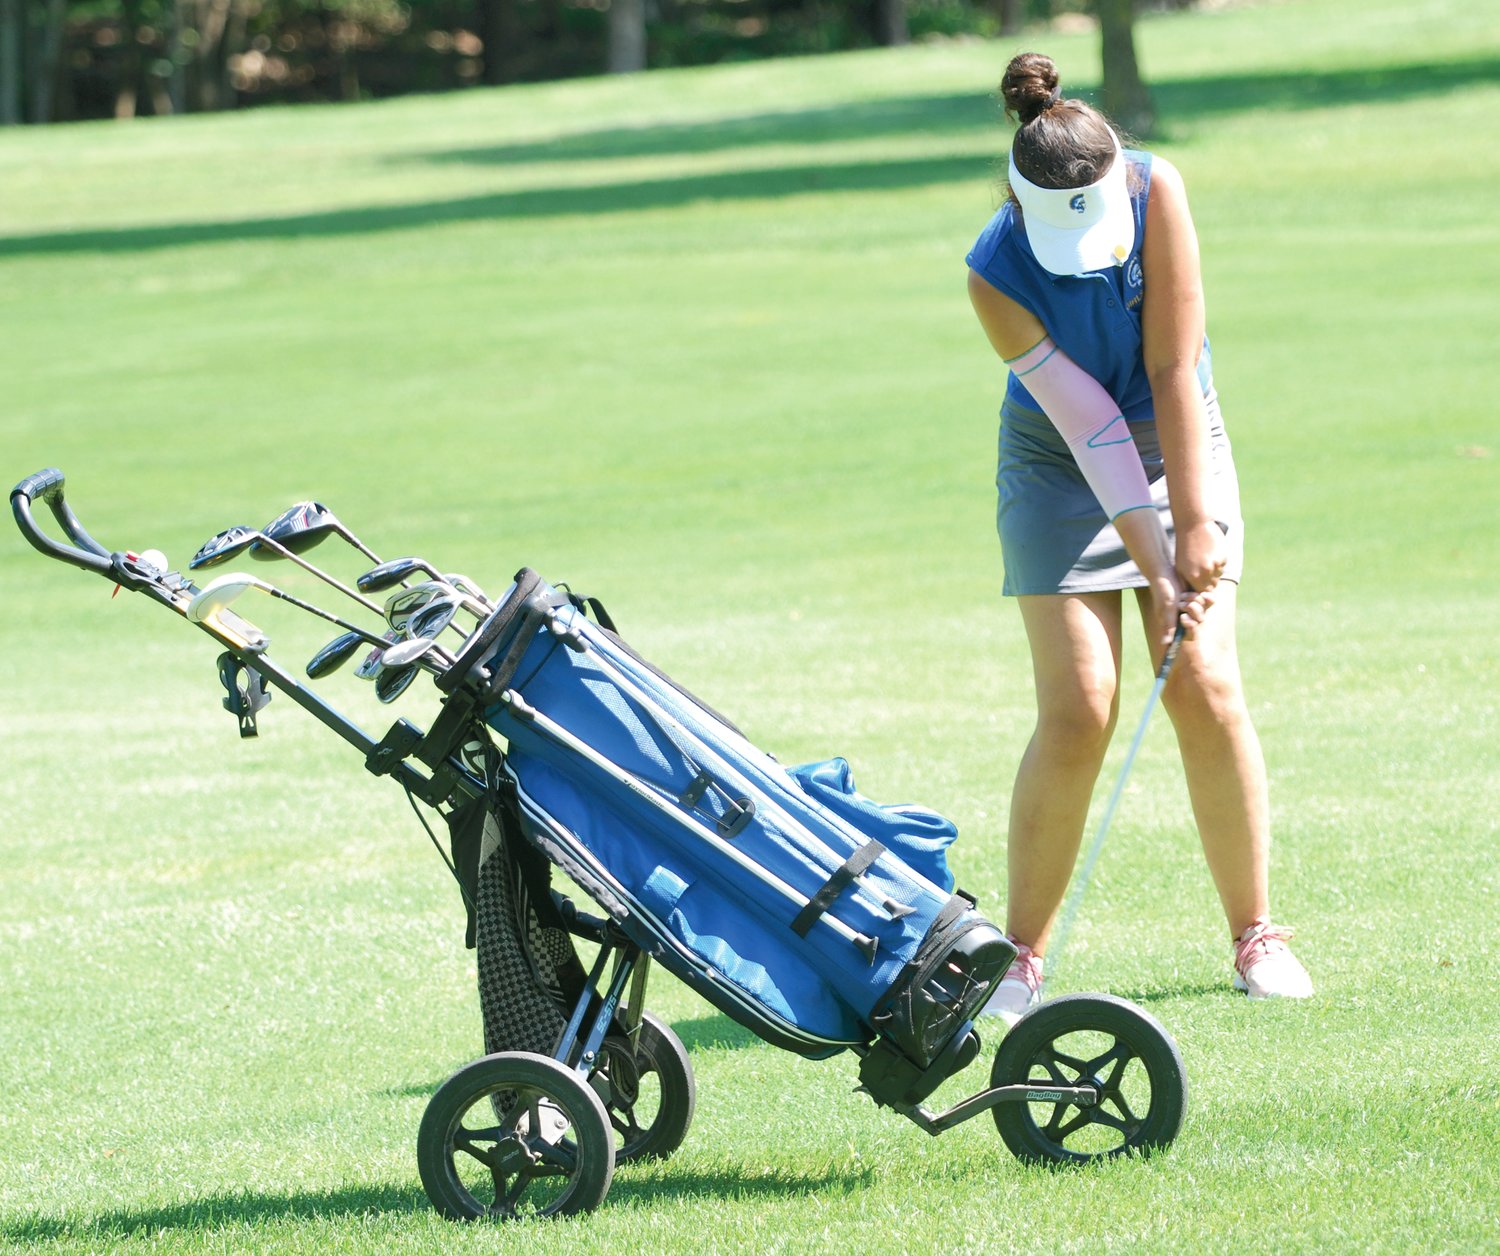 Crawfordsville's Bailey Mittal chips an approach show to the green at the Crawfordsville Country Club on Saturday afternoon. The senior led the Athenians with a personal best score of 89.